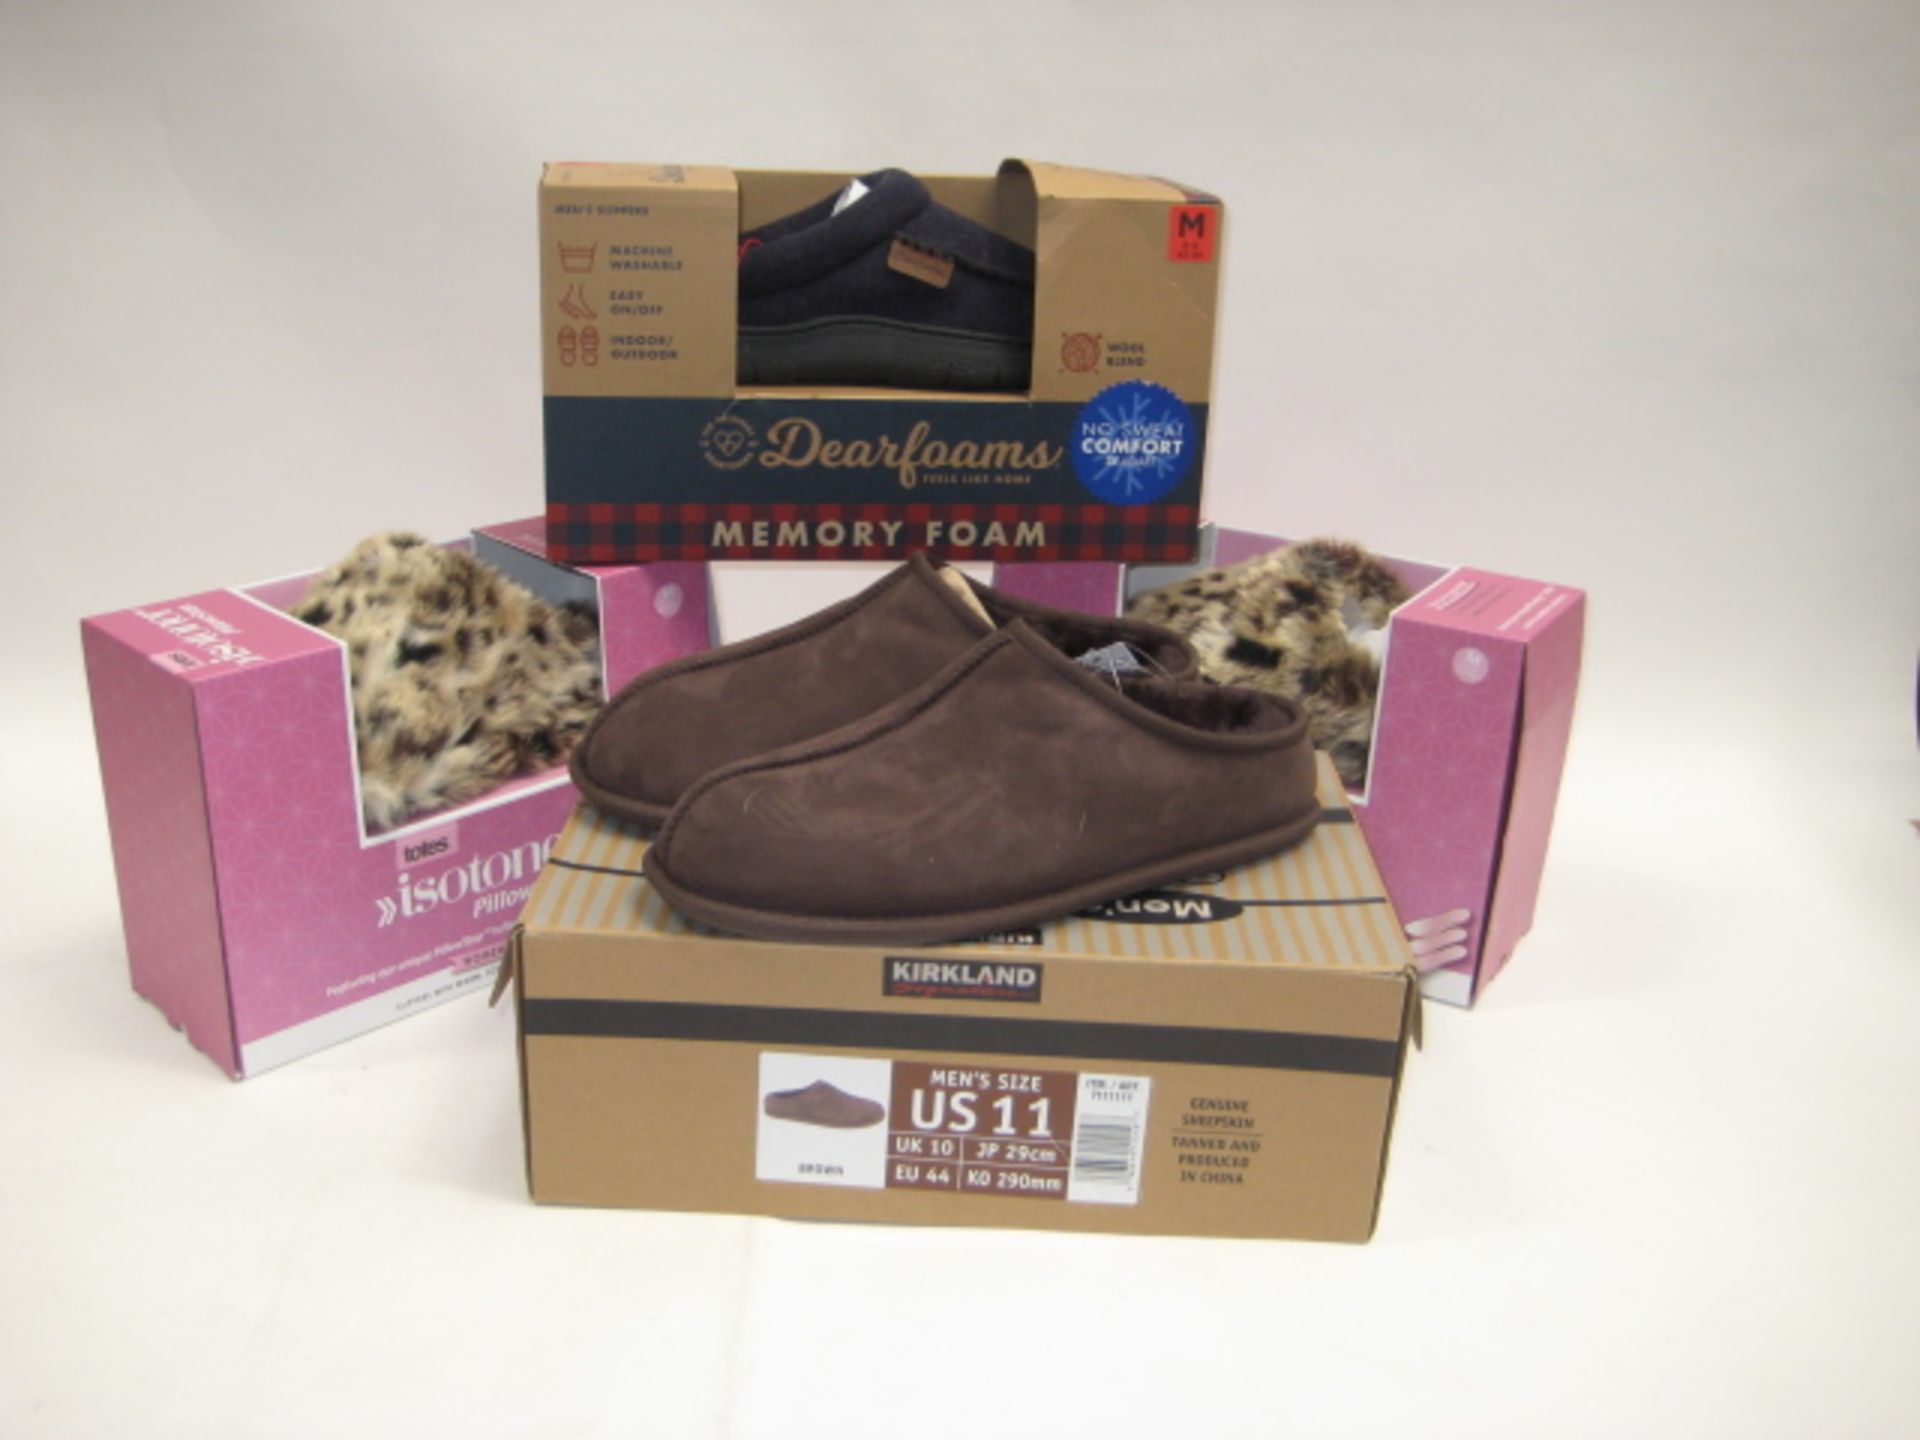 3 boxed pairs of slippers to include a mens size 10 pair of brown slip on slippers, 2 boxed pairs of